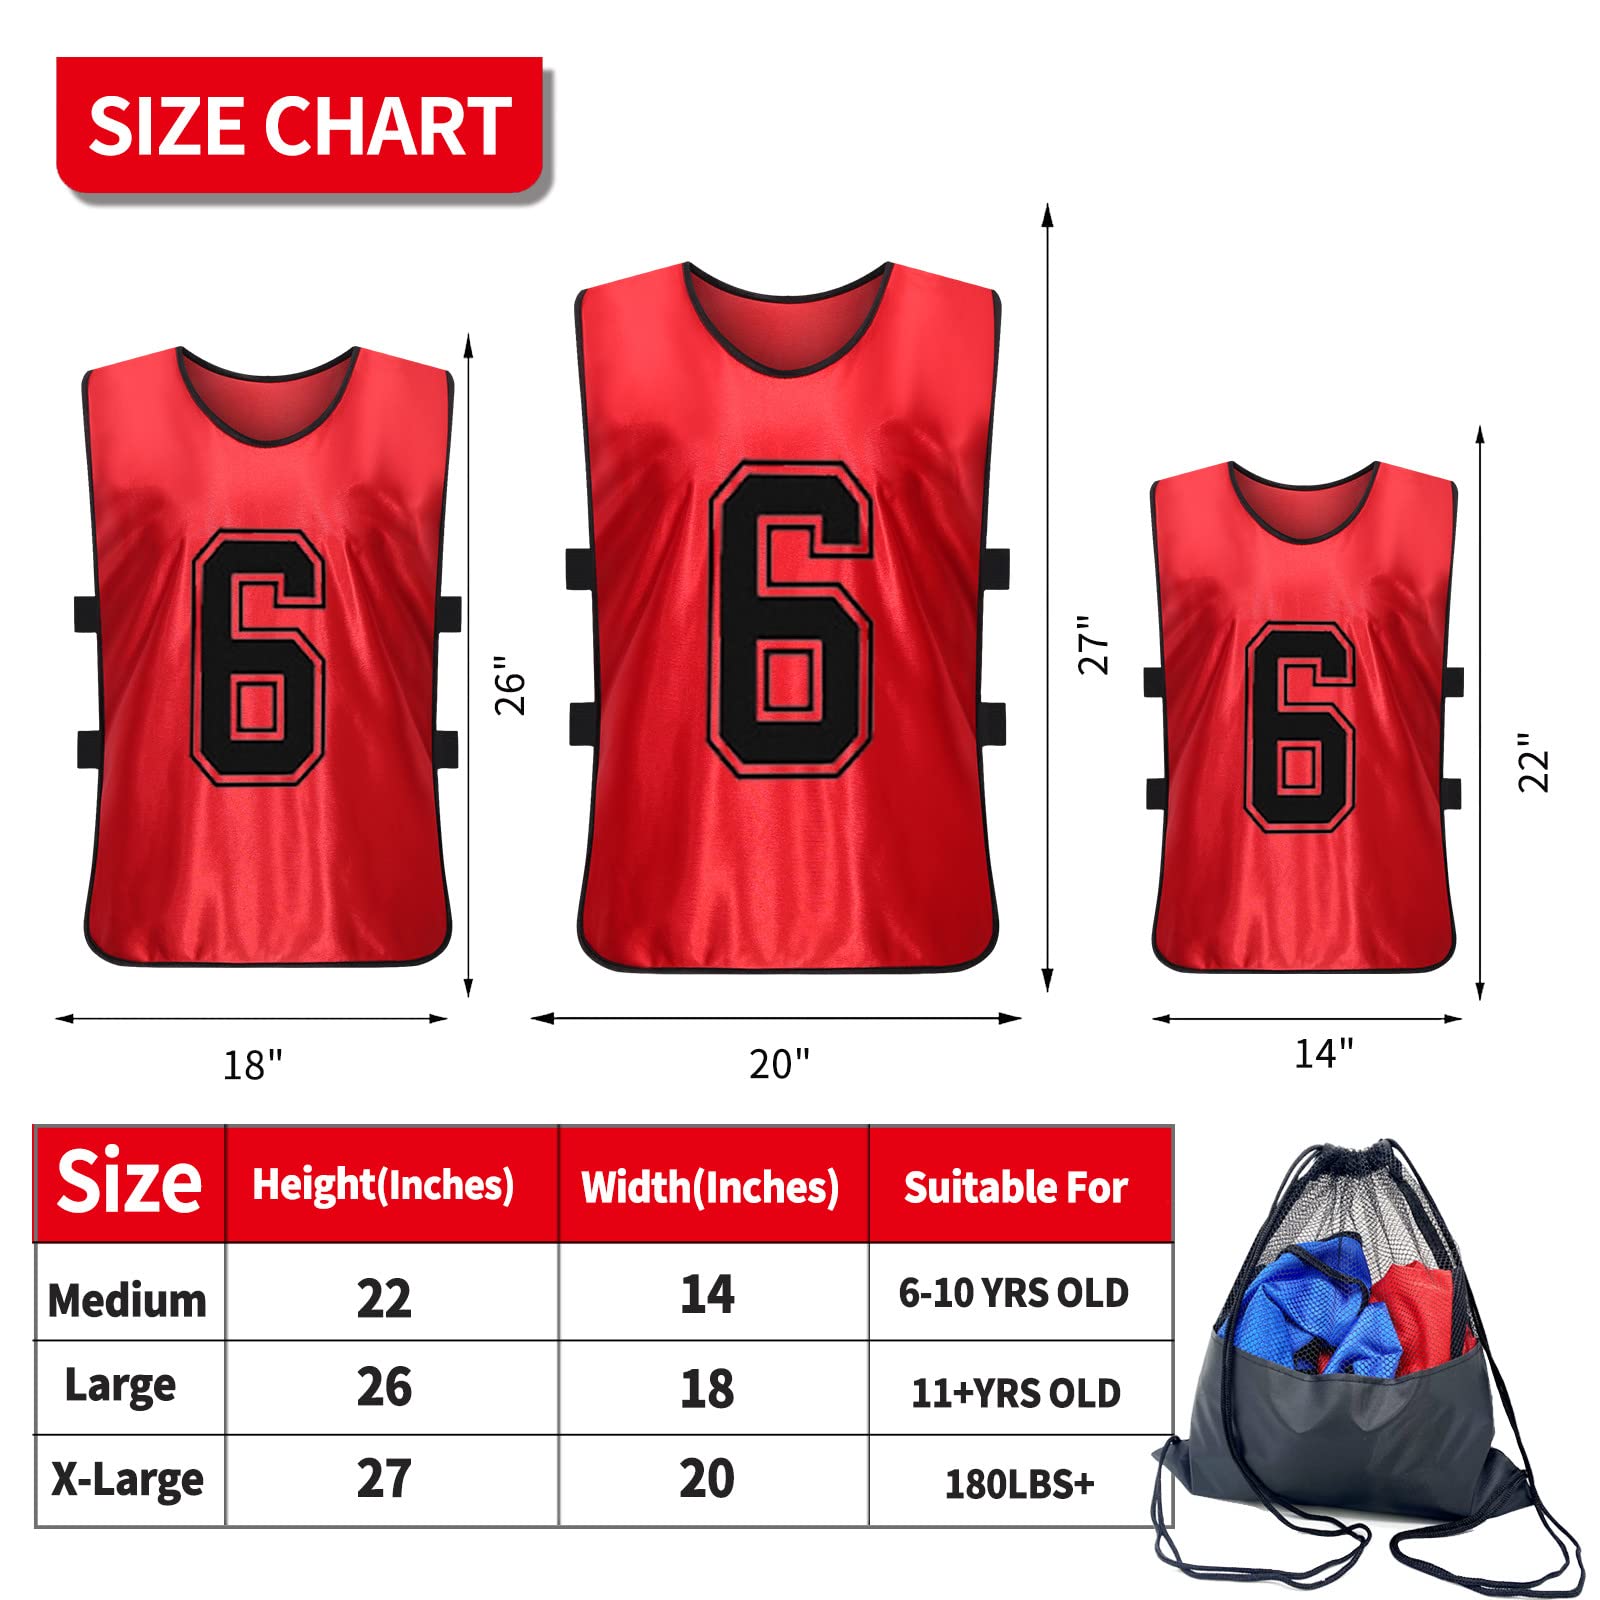 PULUOMASI Sports Pinnies-Numbered Practice Vest Pennies for Soccer Basketball Jersey Bibs -Set of 12/Youth Adults Team